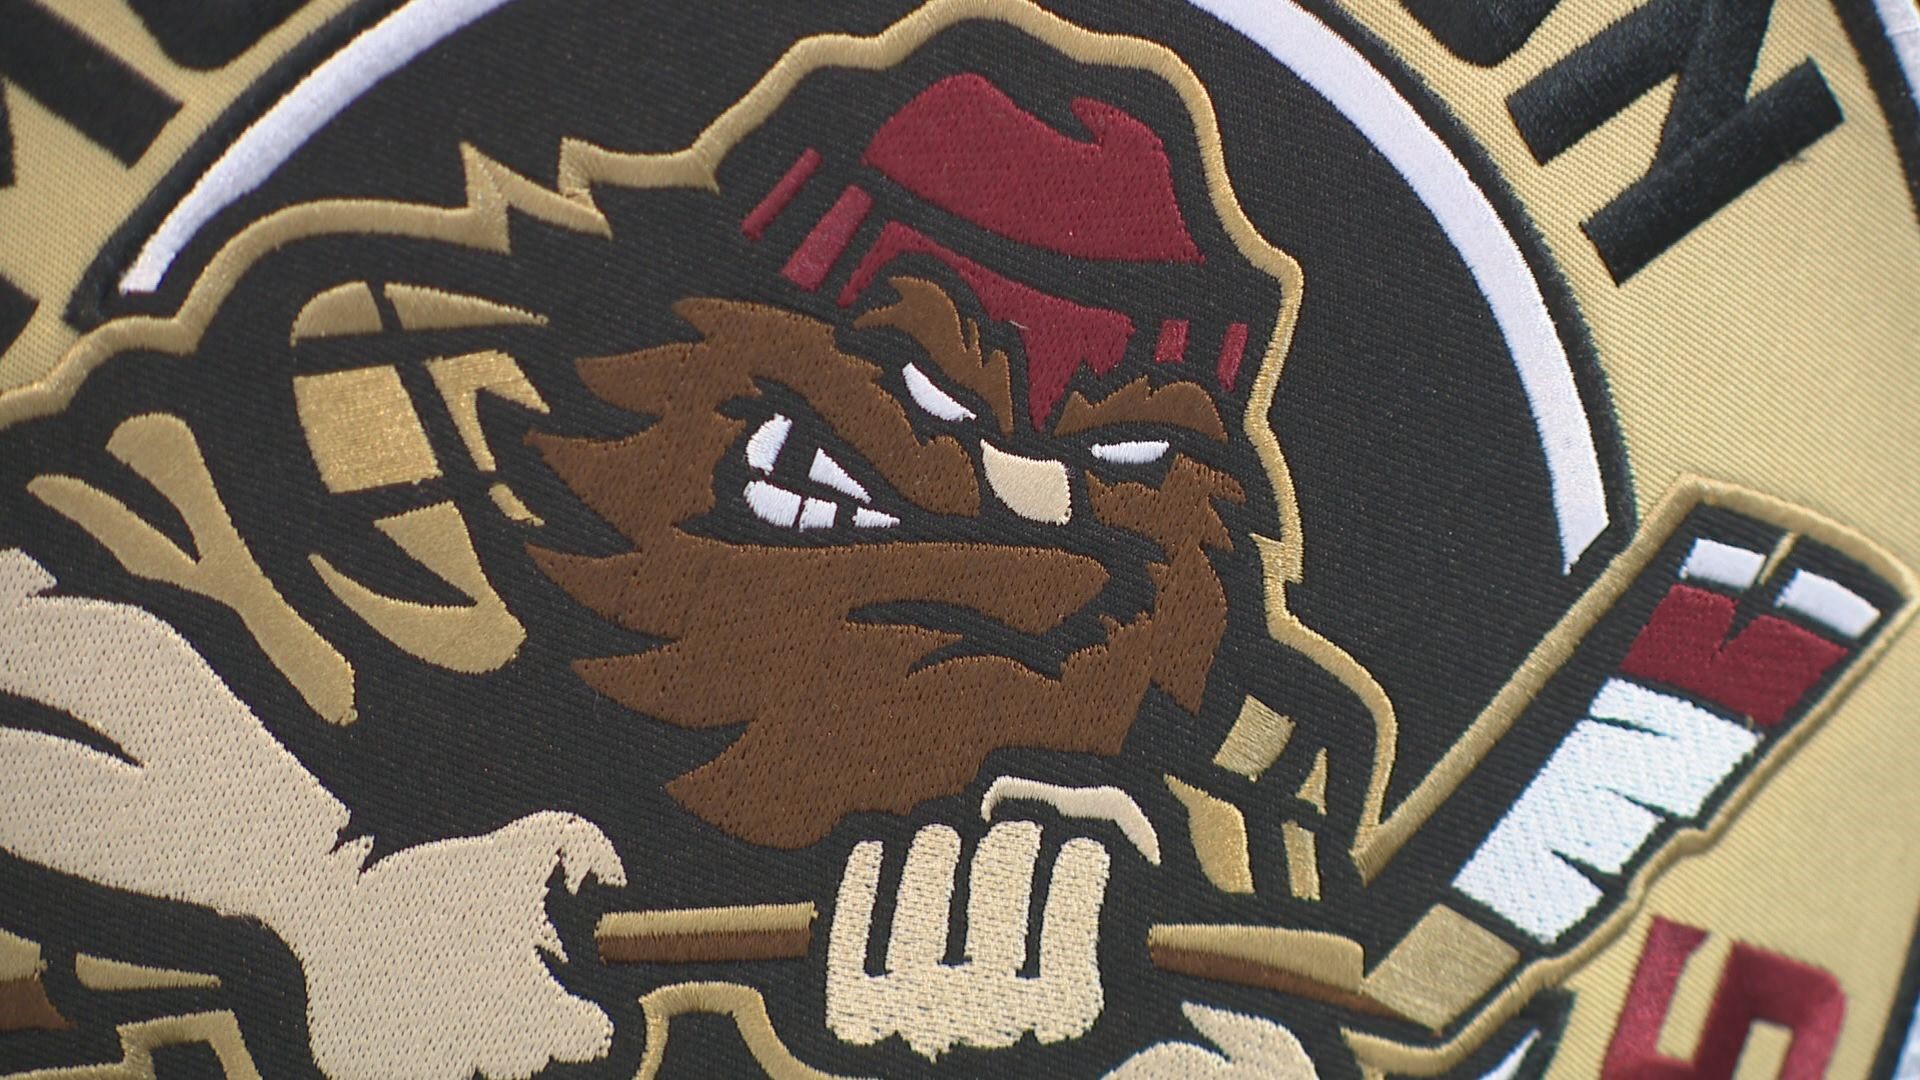 The Muskegon Lumberjacks are officially under new ownership after being purchased by former IHL Turner Cup Champion Peter Herms.